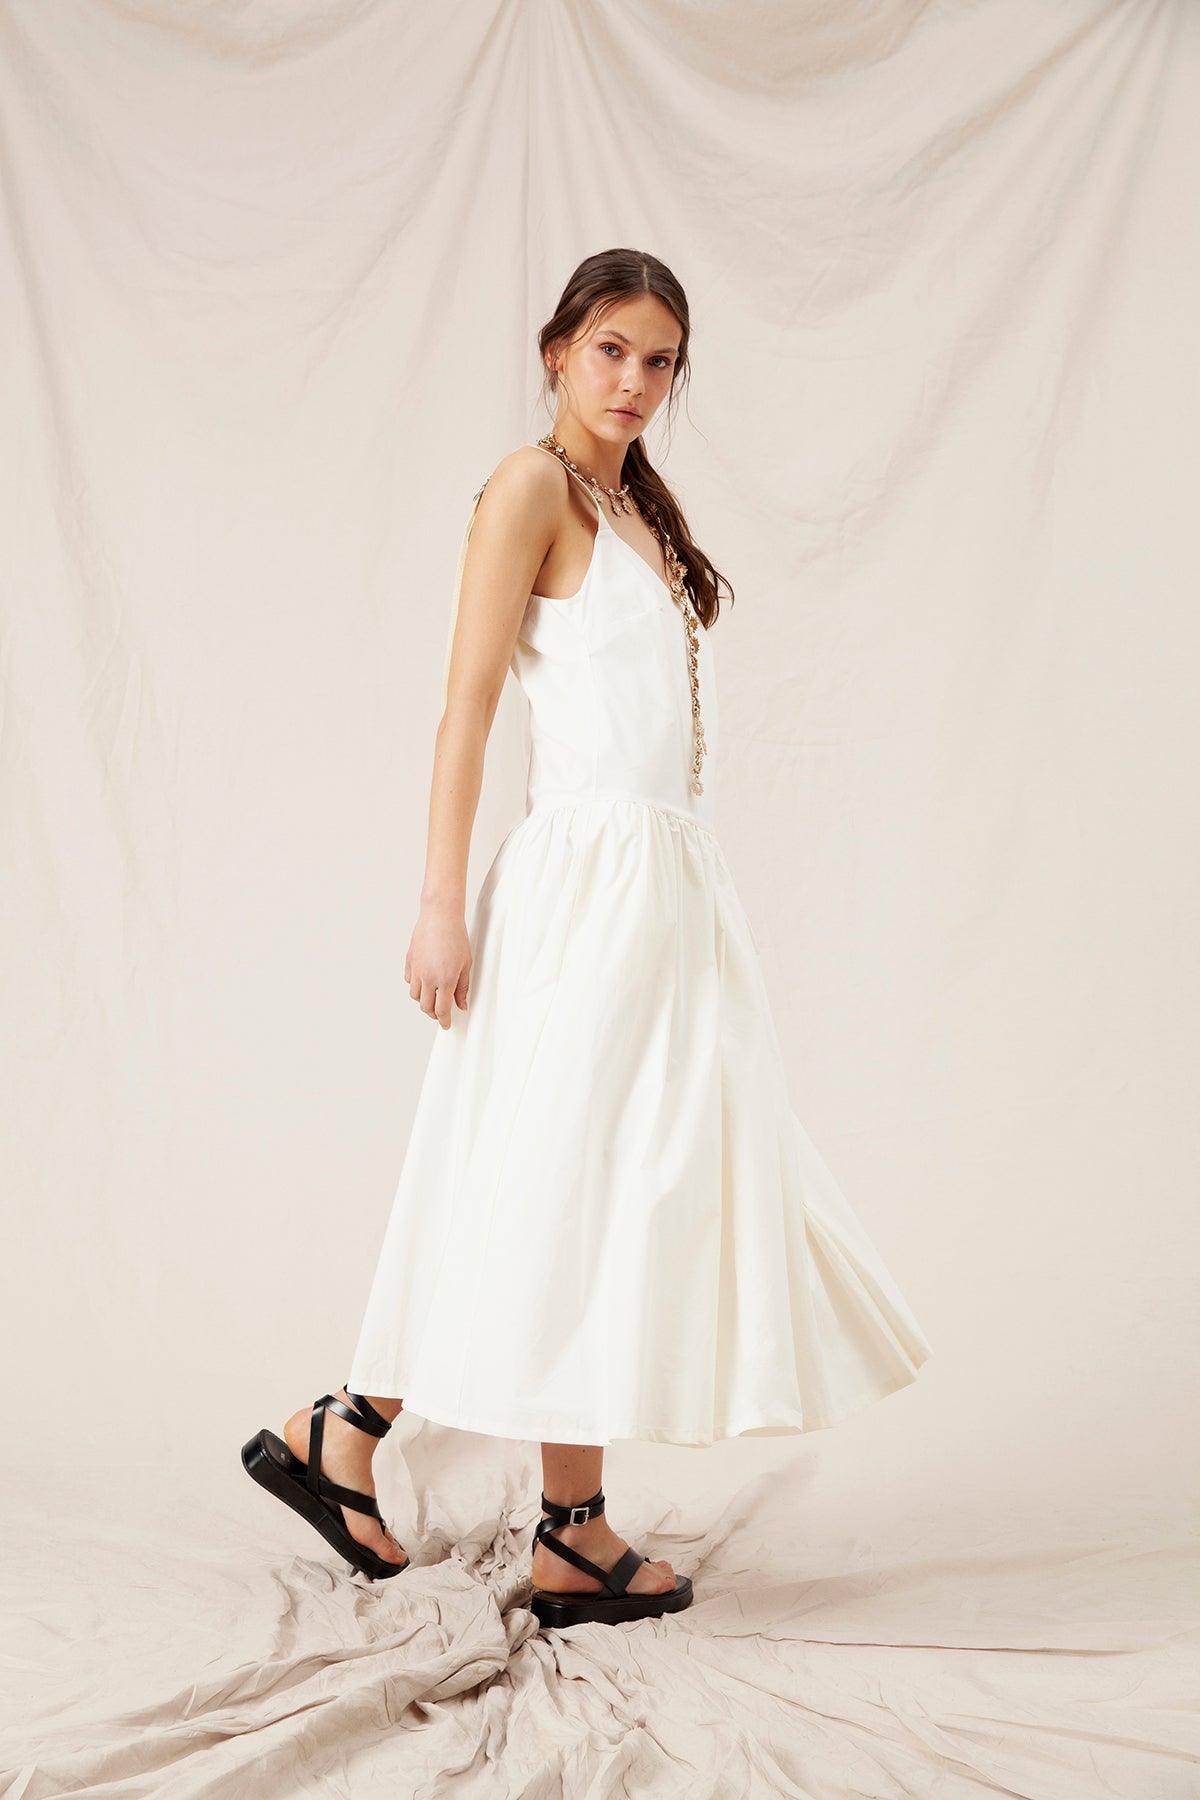 Buy The Ivory Dress by Ladiesse